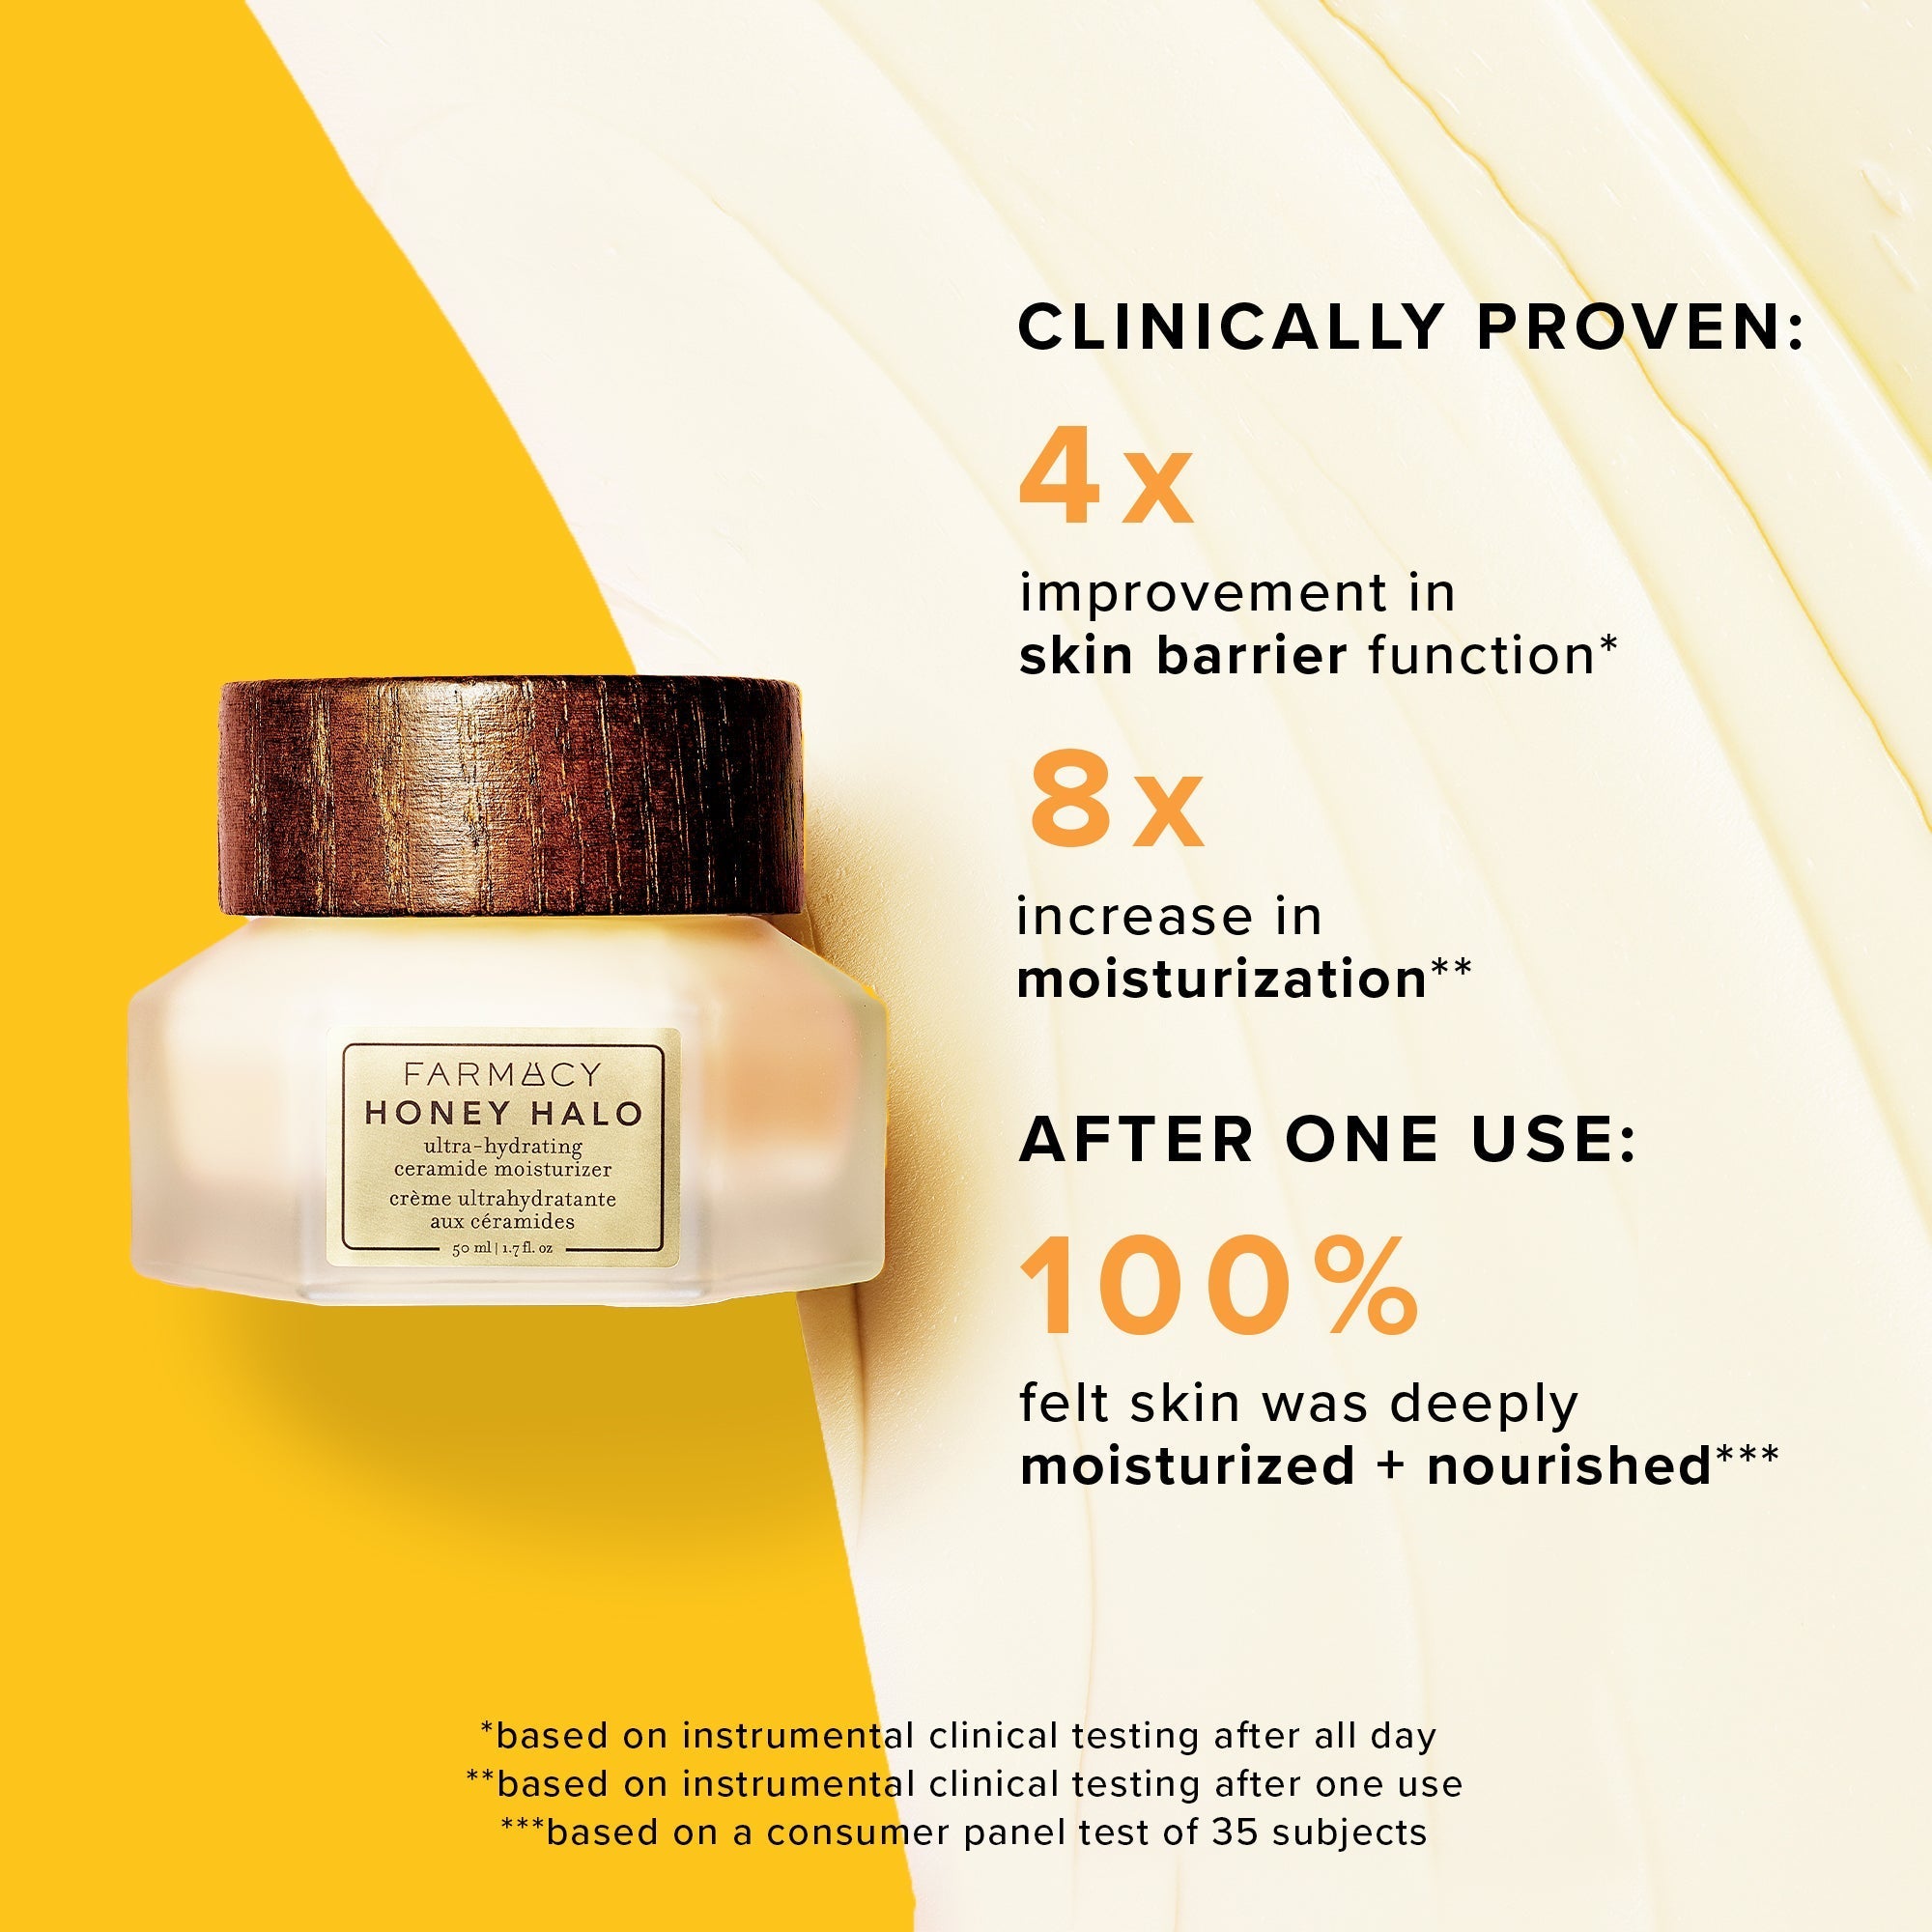 An infographic outlining the clinically proven benefits of the Honey Hao